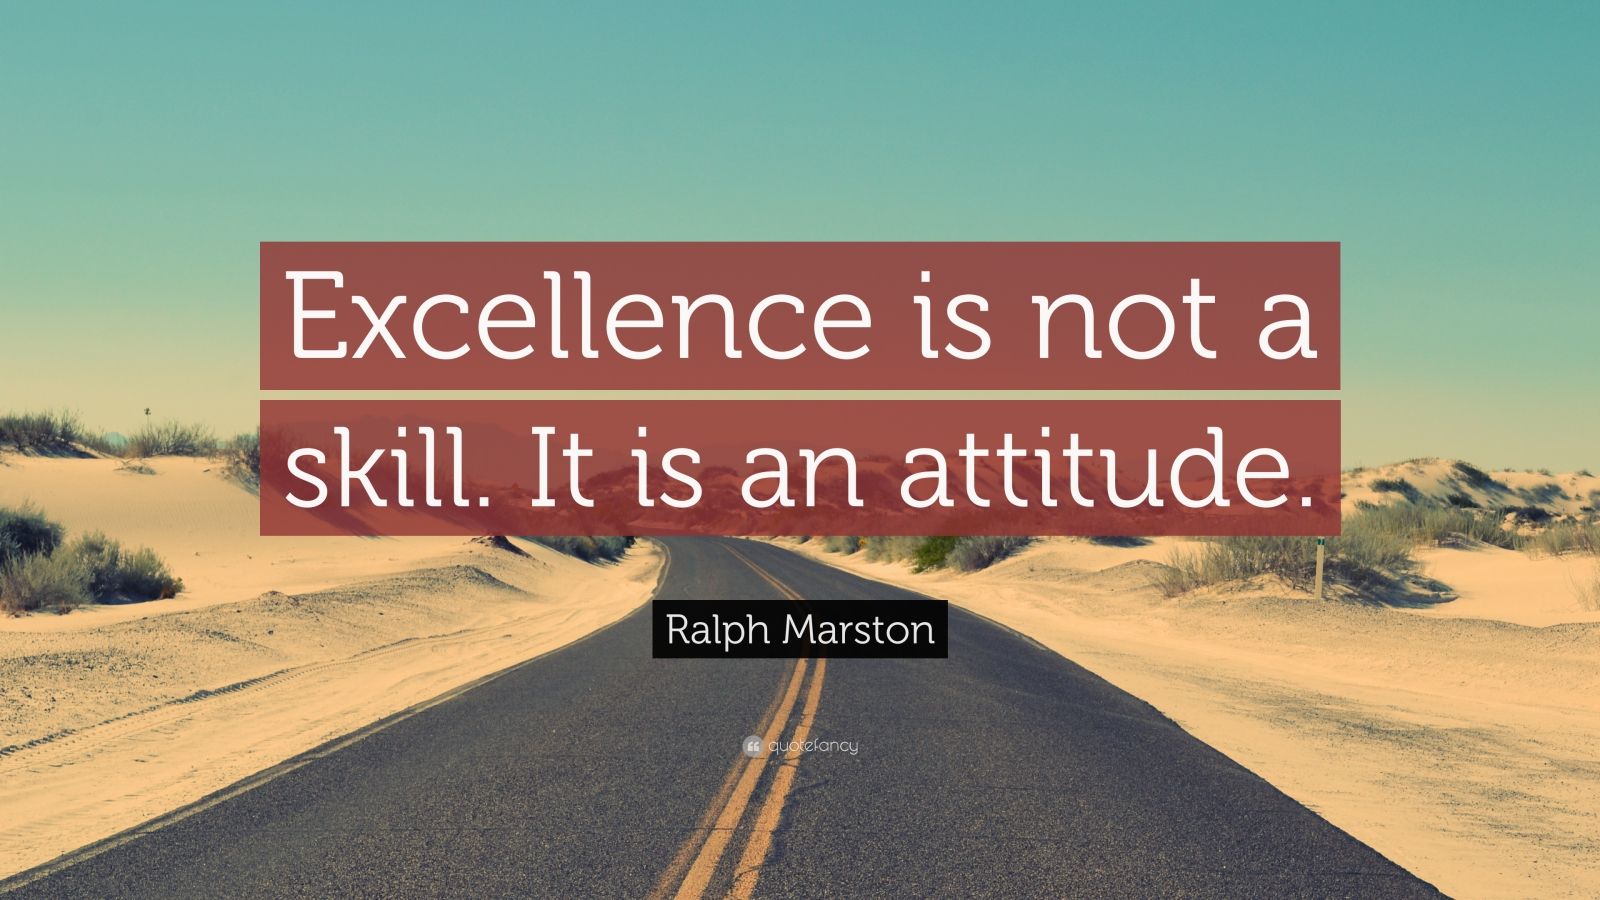 Ralph Marston Quote: “Excellence is not a skill. It is an attitude.” (7